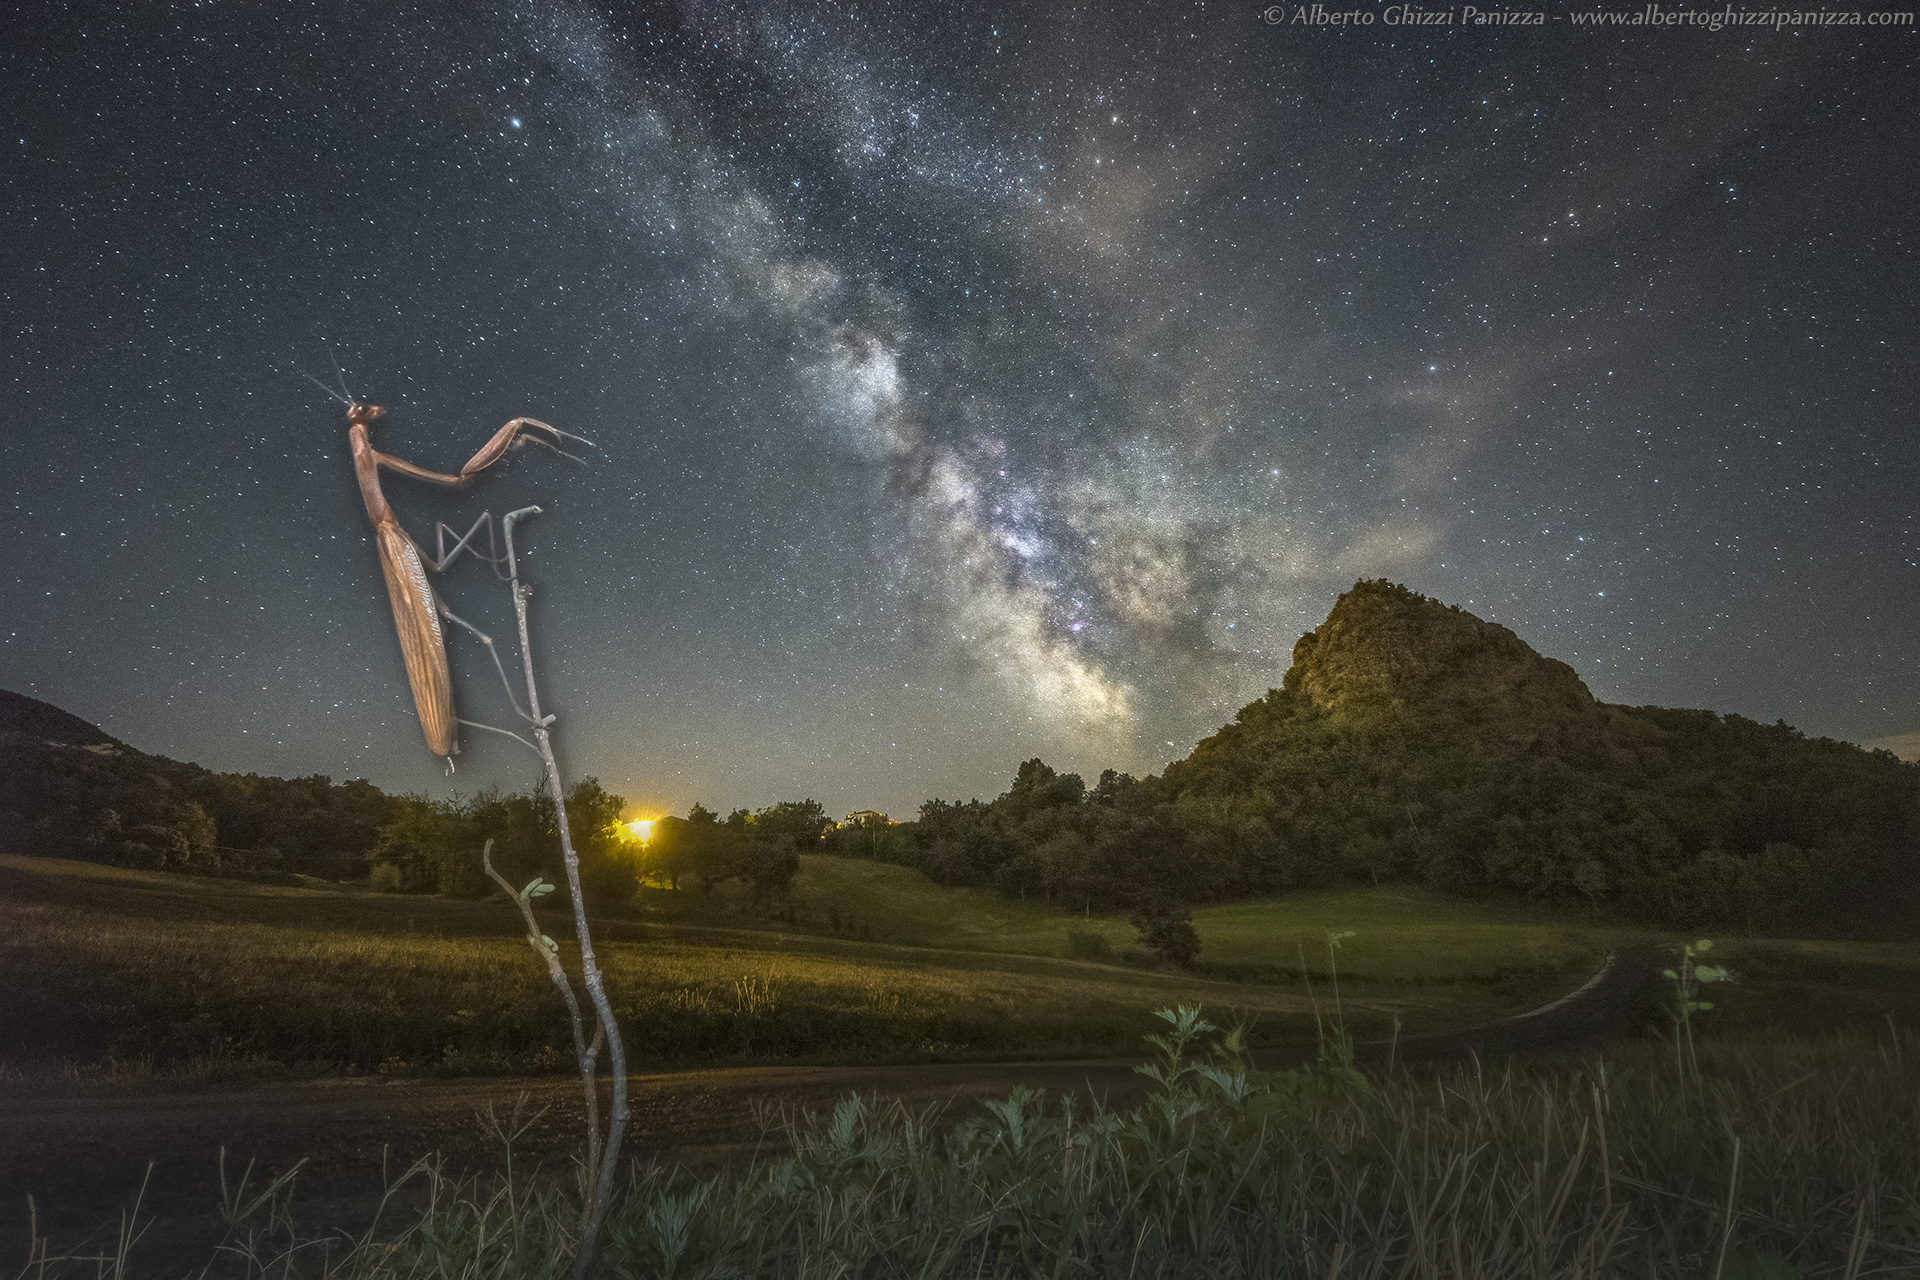 Mantises are also attracted to stars...